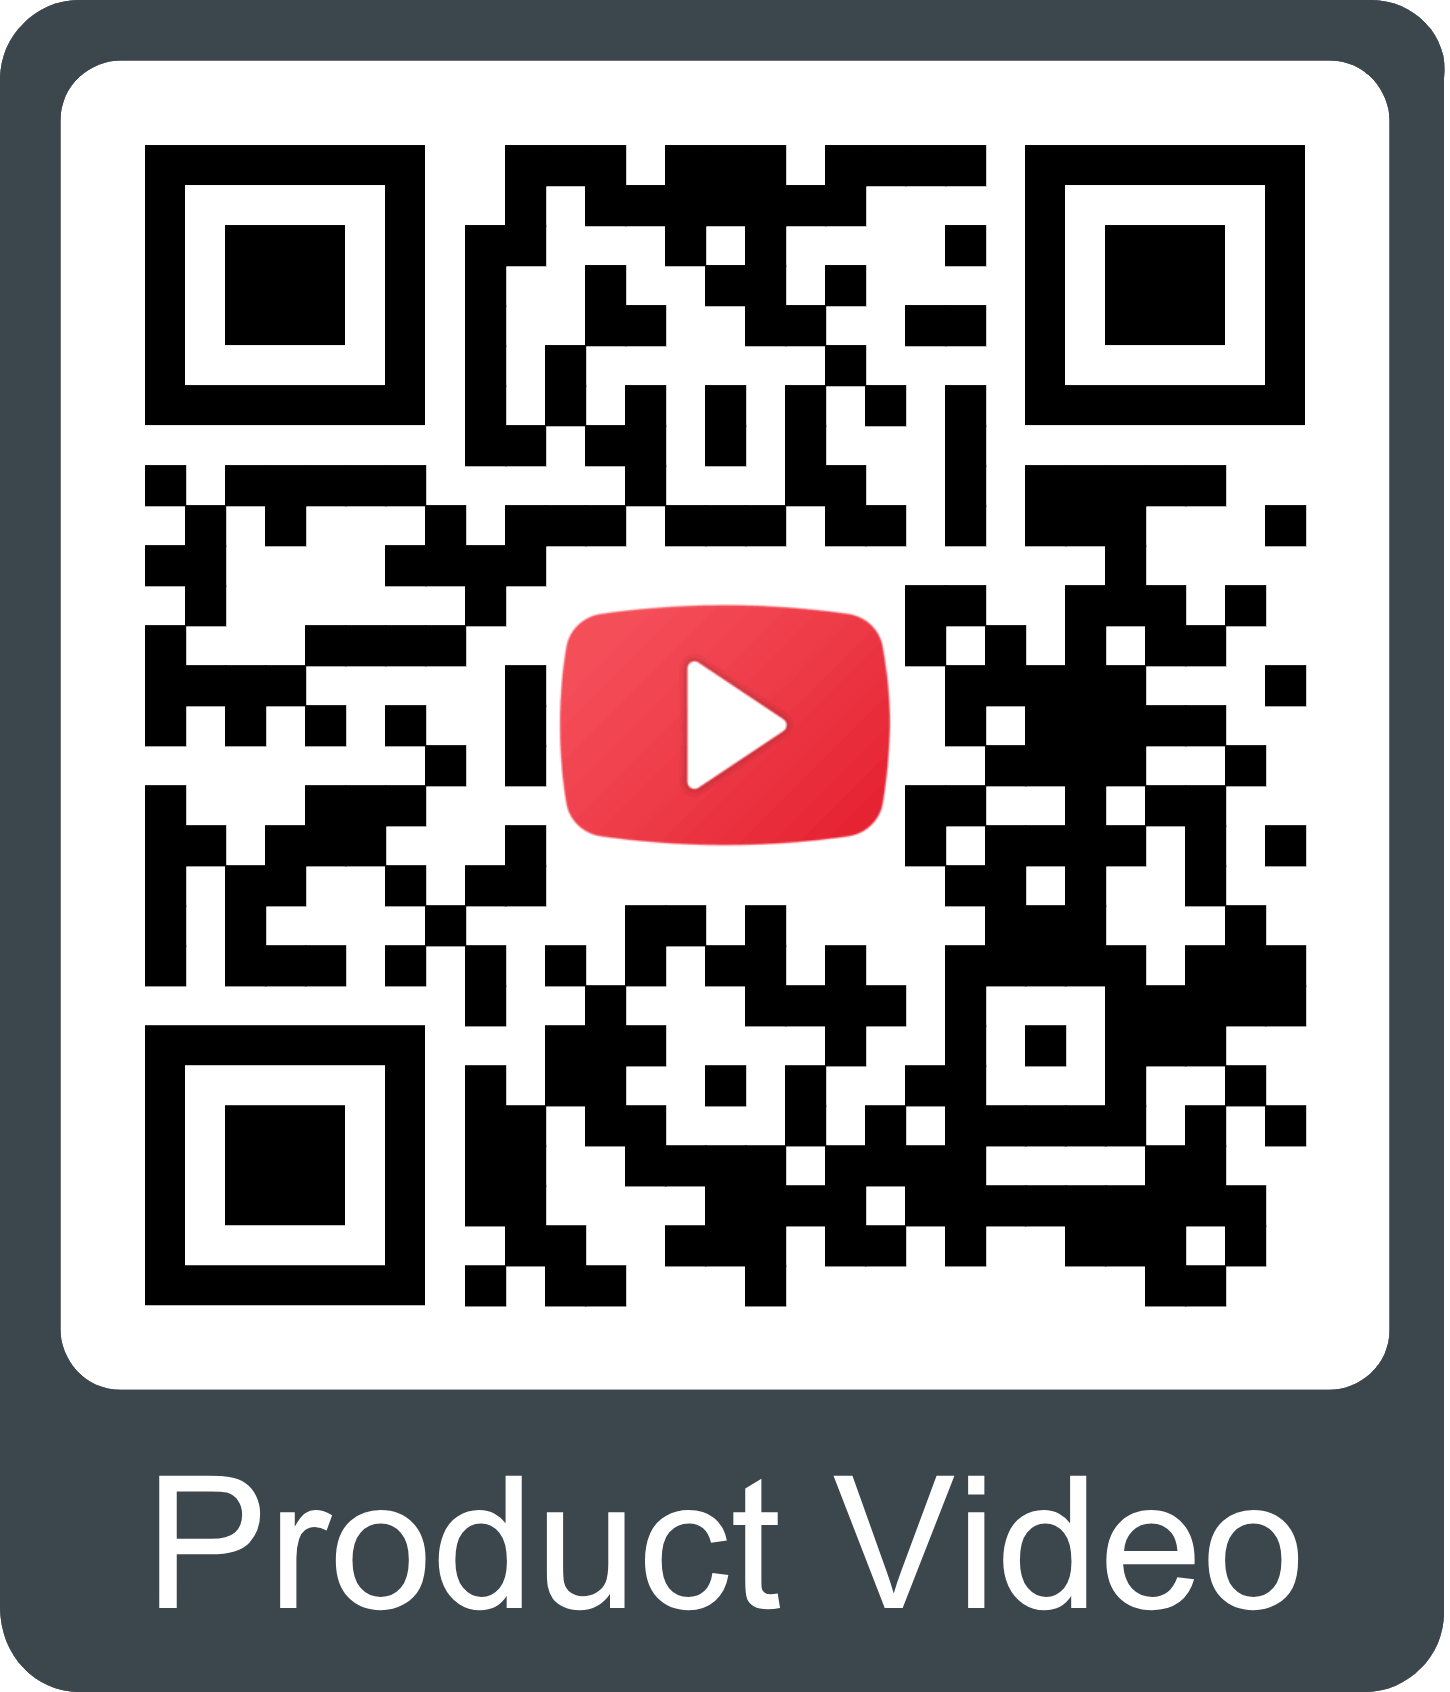 QR code to product video